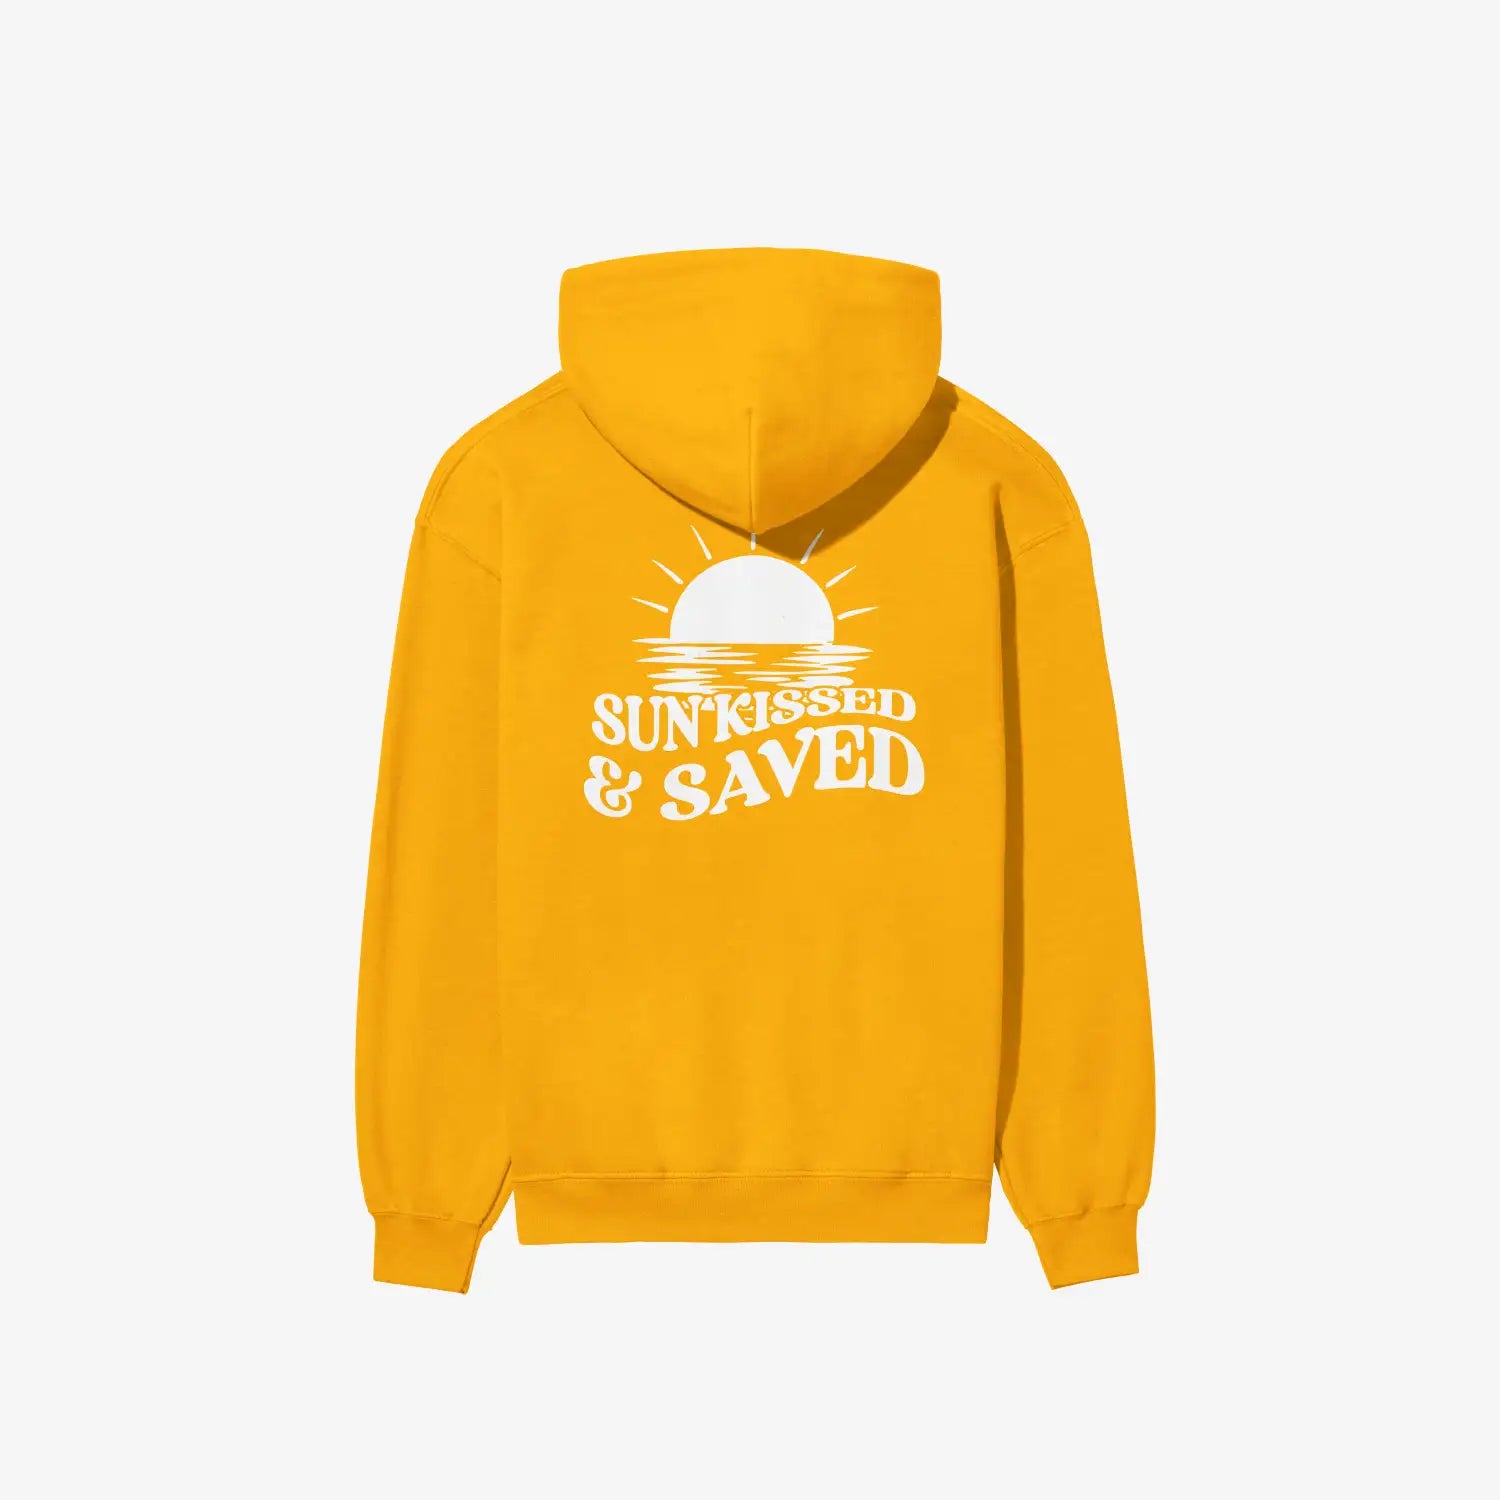 Sunkissed & Saved Hoodie from Be Still and Know, shining under the sun, representing faith in salvation.